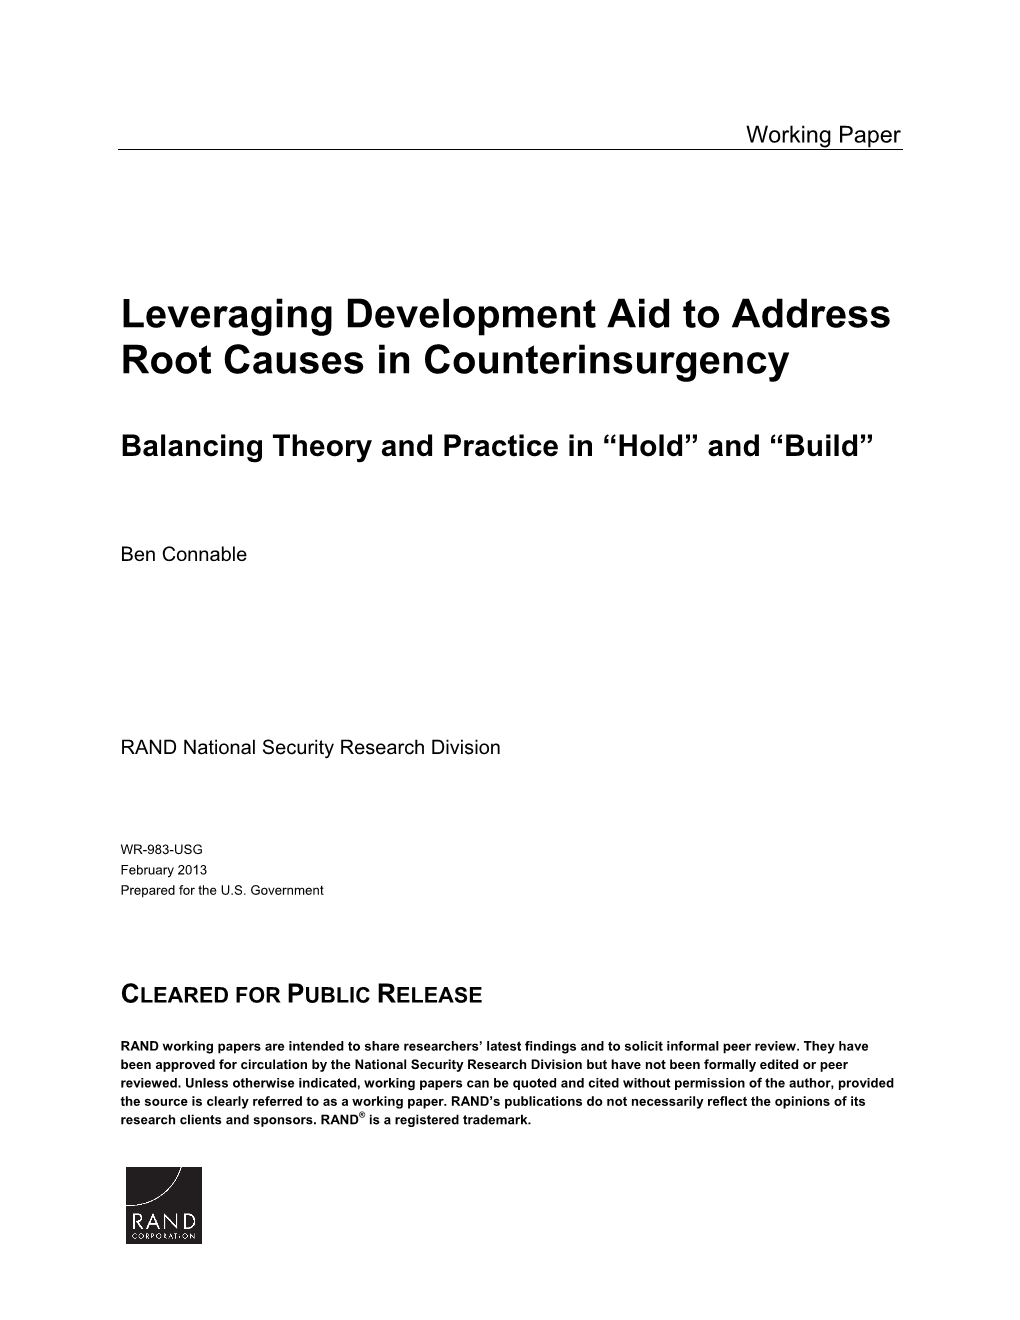 Leveraging Development Aid to Address Root Causes in Counterinsurgency